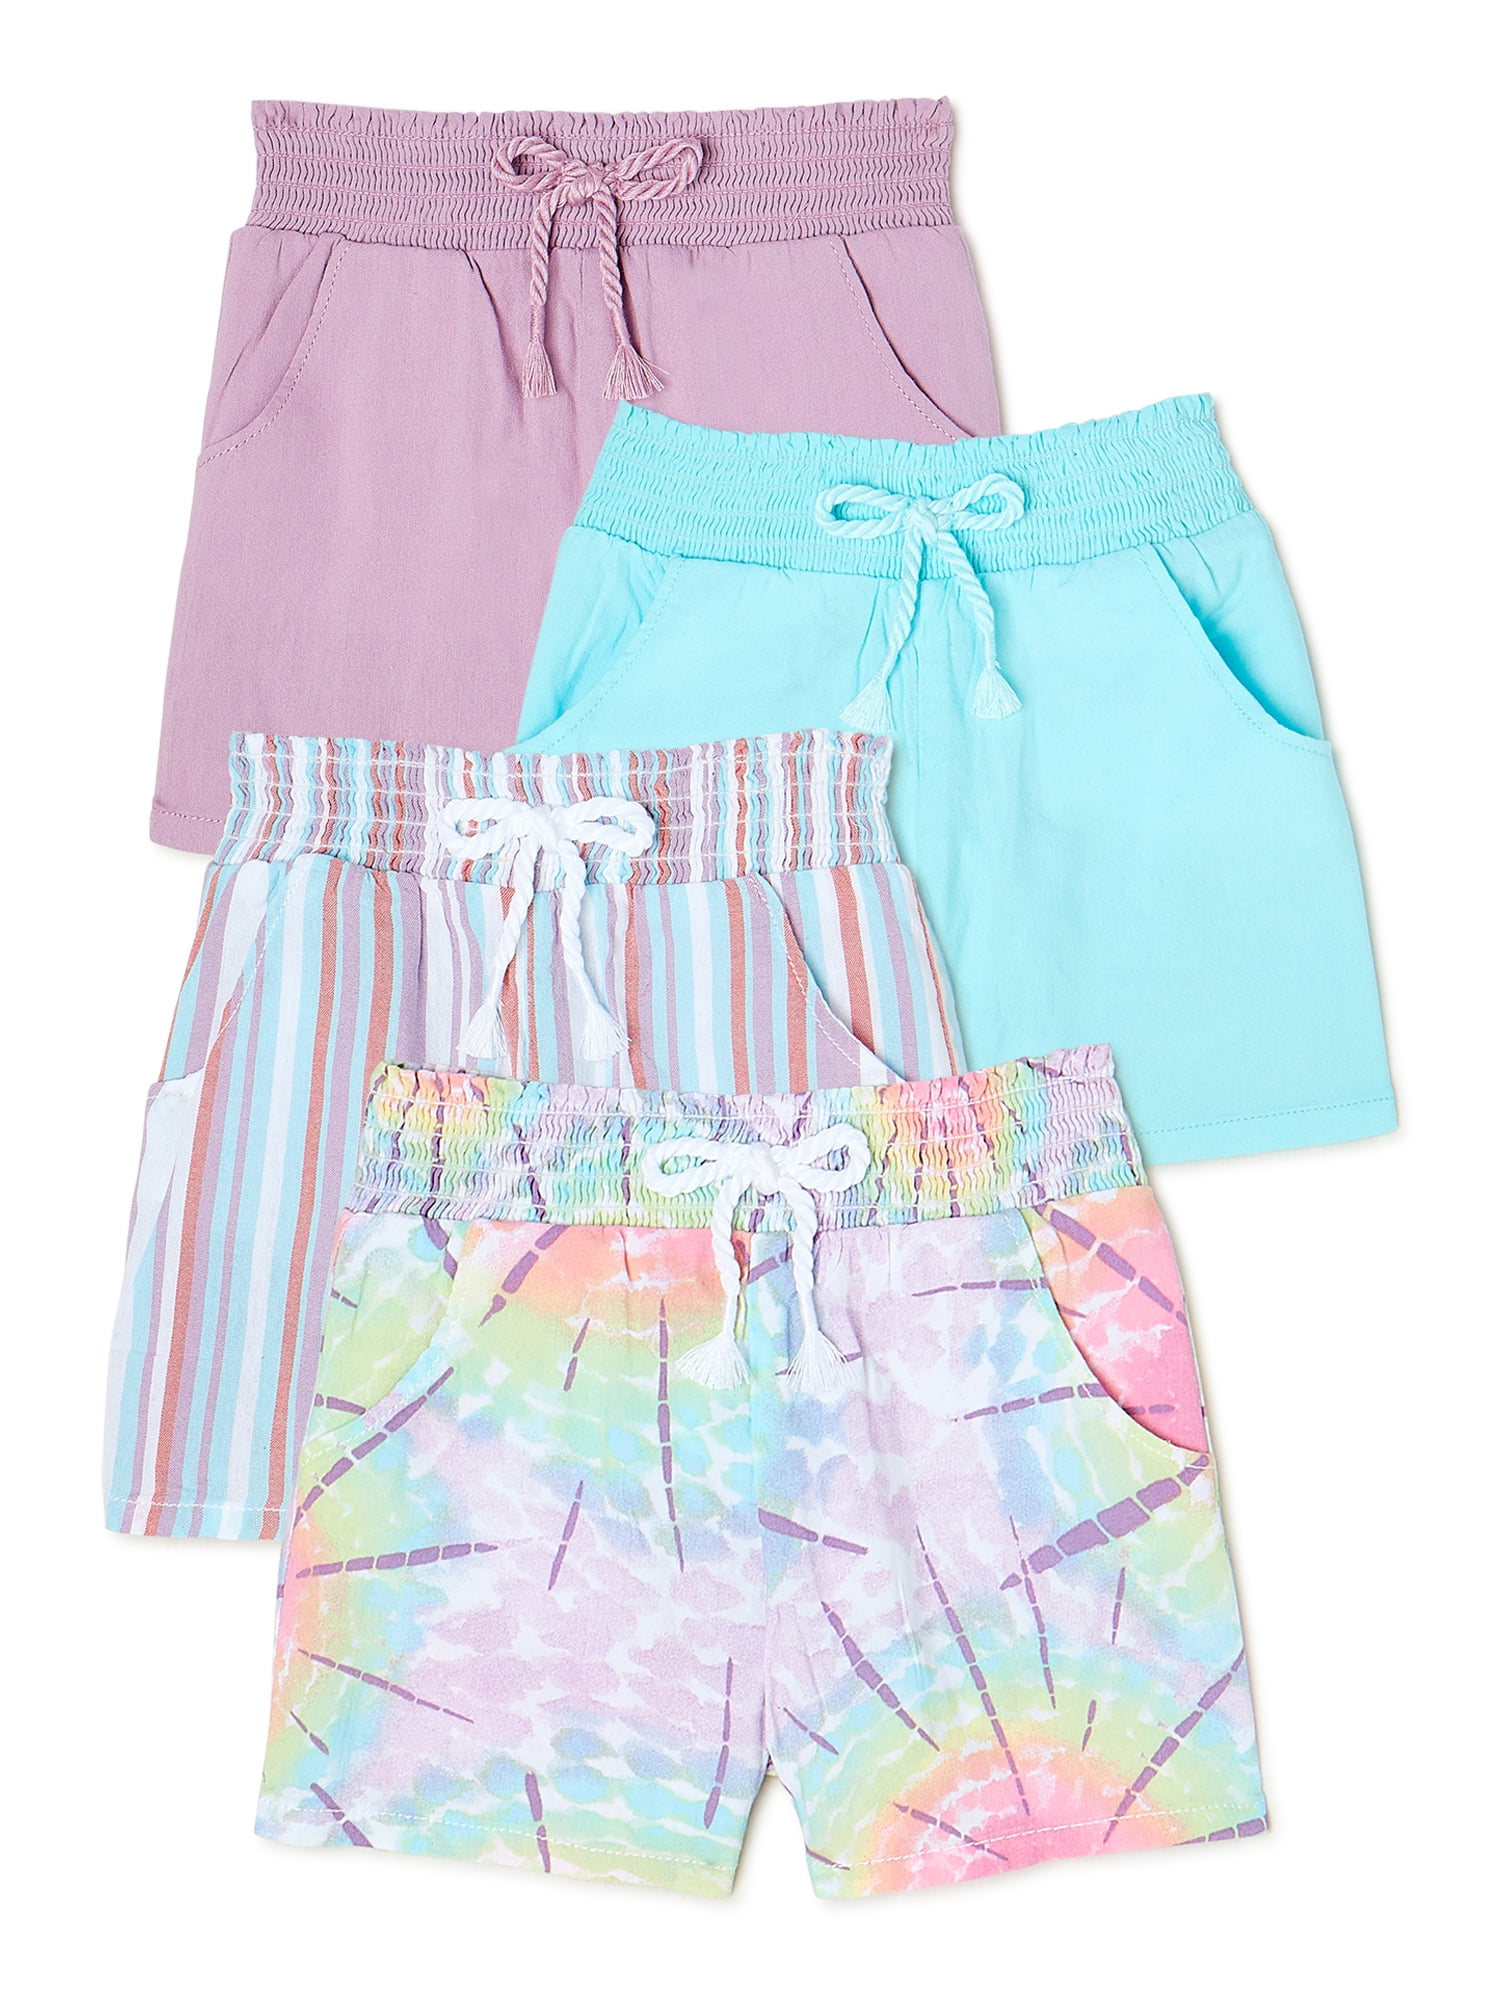 GIRLS SUMMER SHORTS LIGHTWEIGHT COLOURS CHECKED,TEAL AND WHITE AGE 8-15+ 